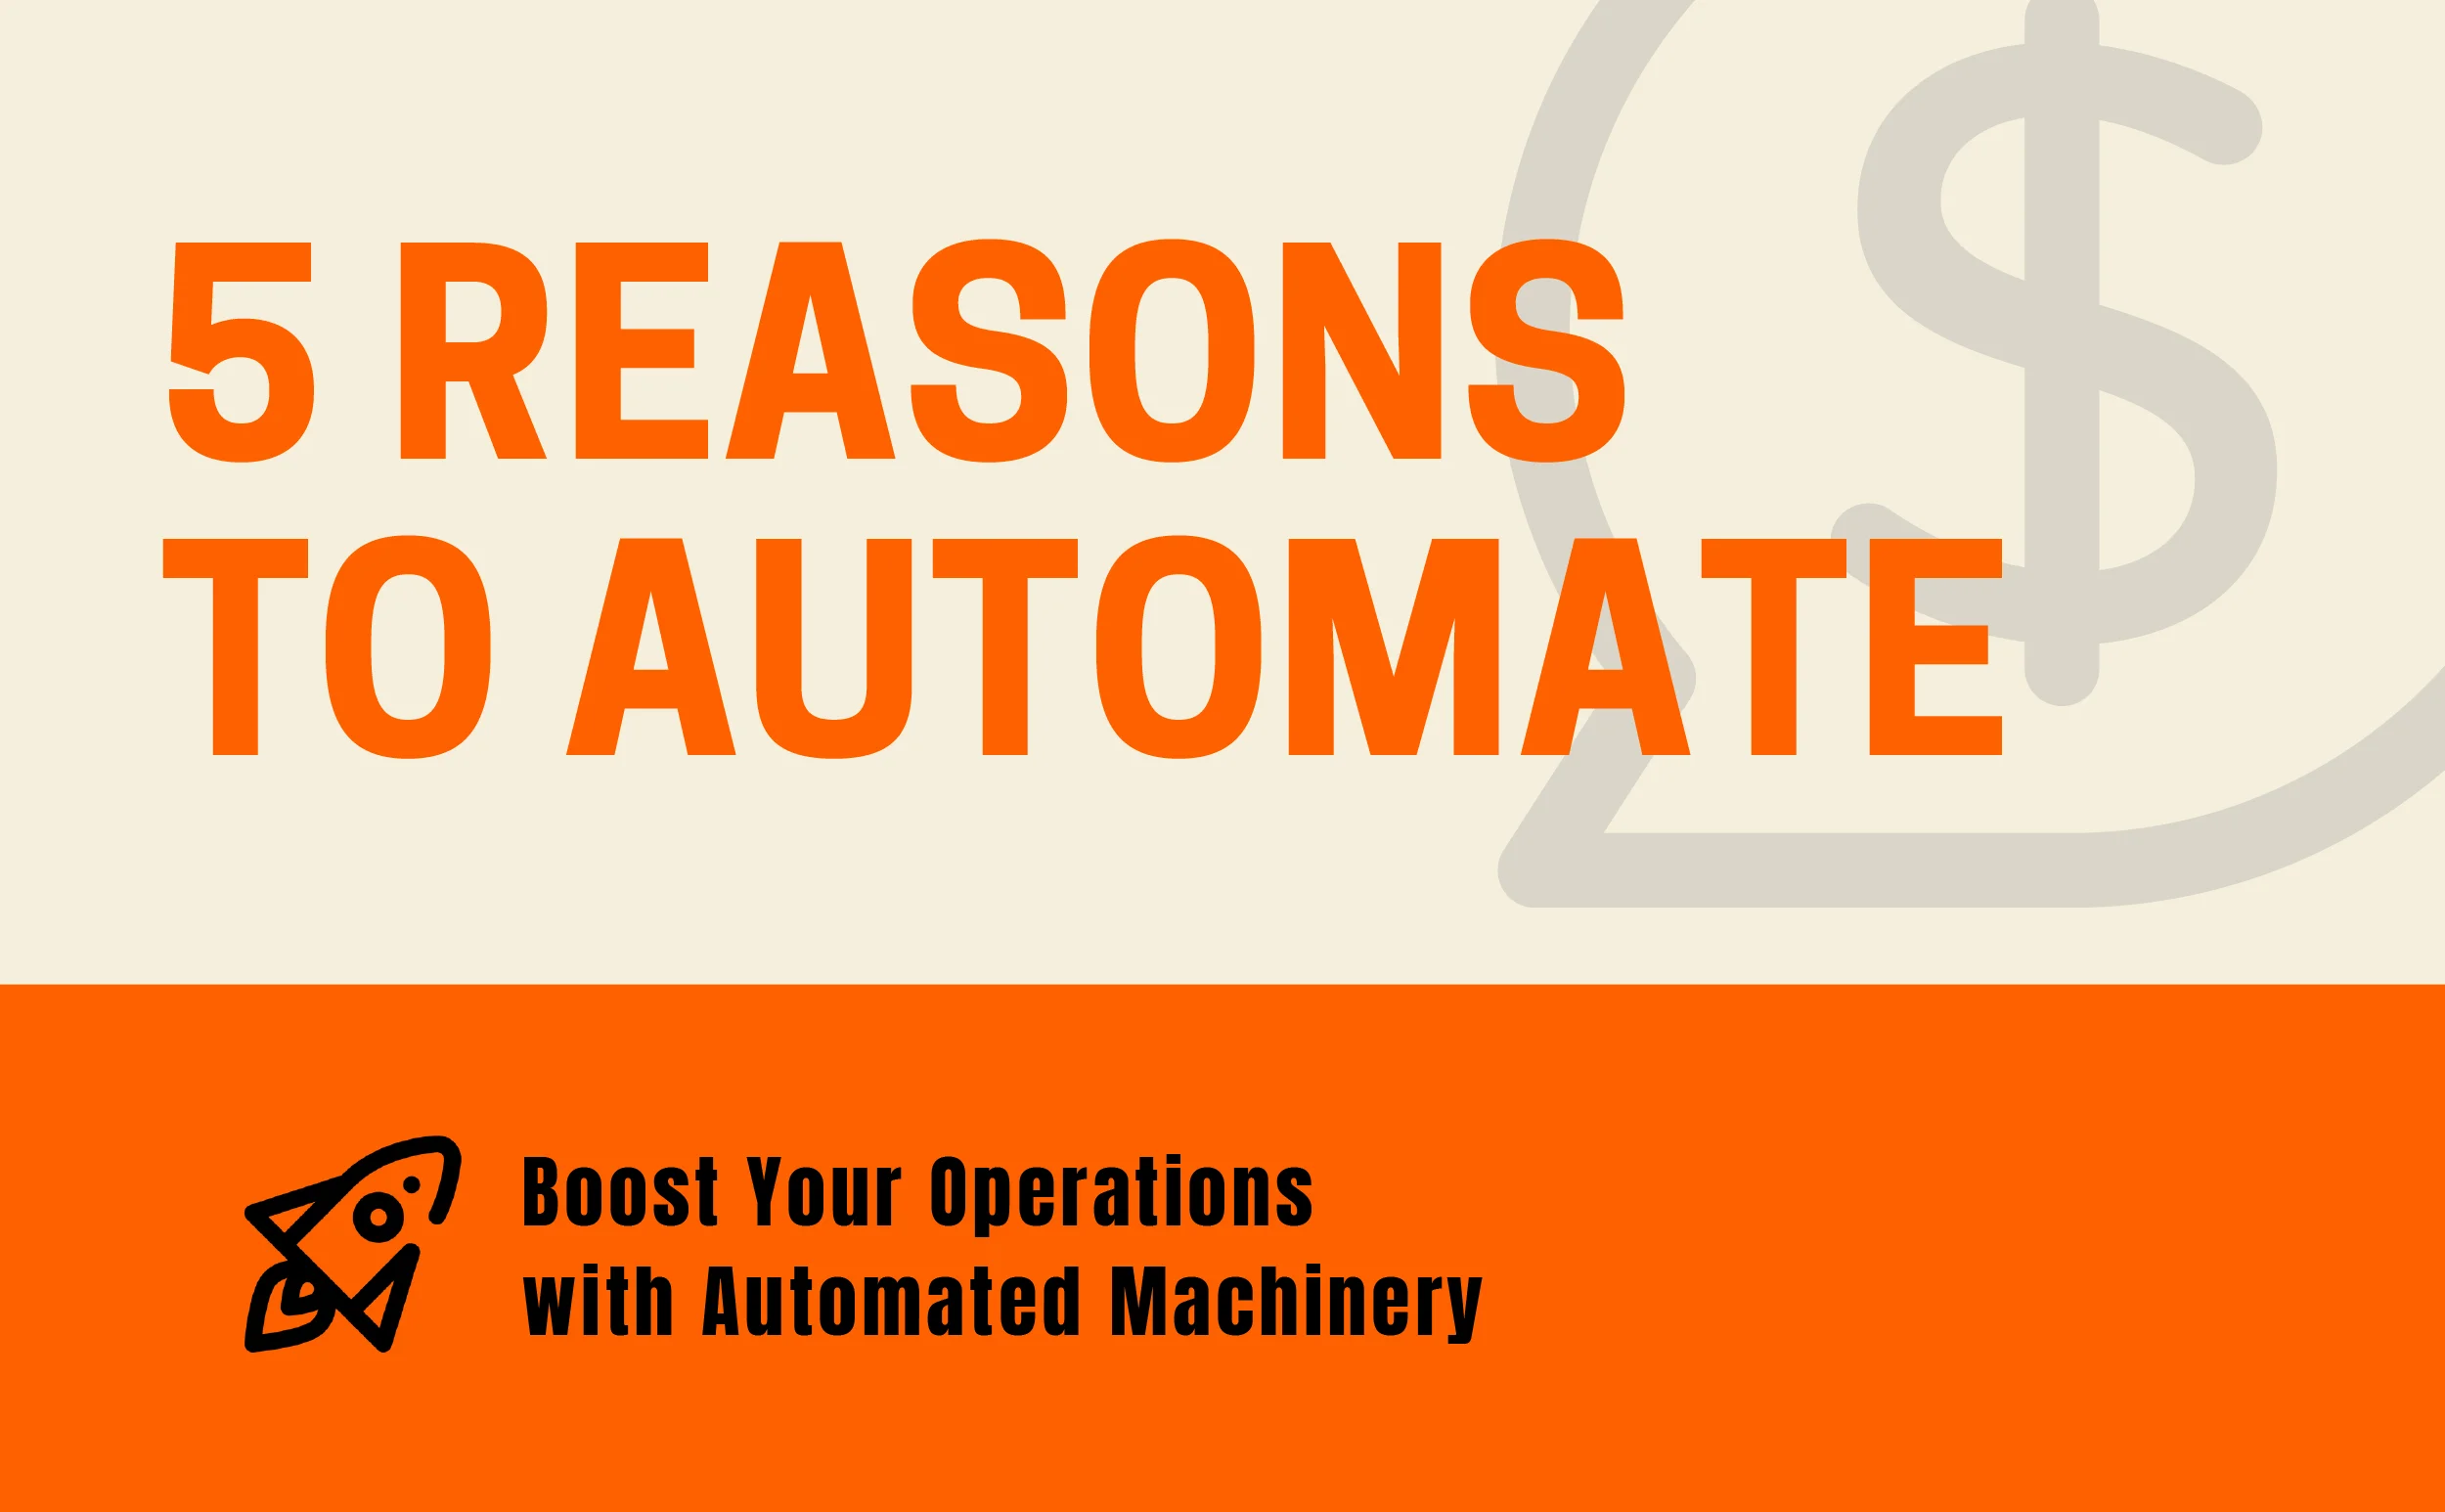 Reasons for automation